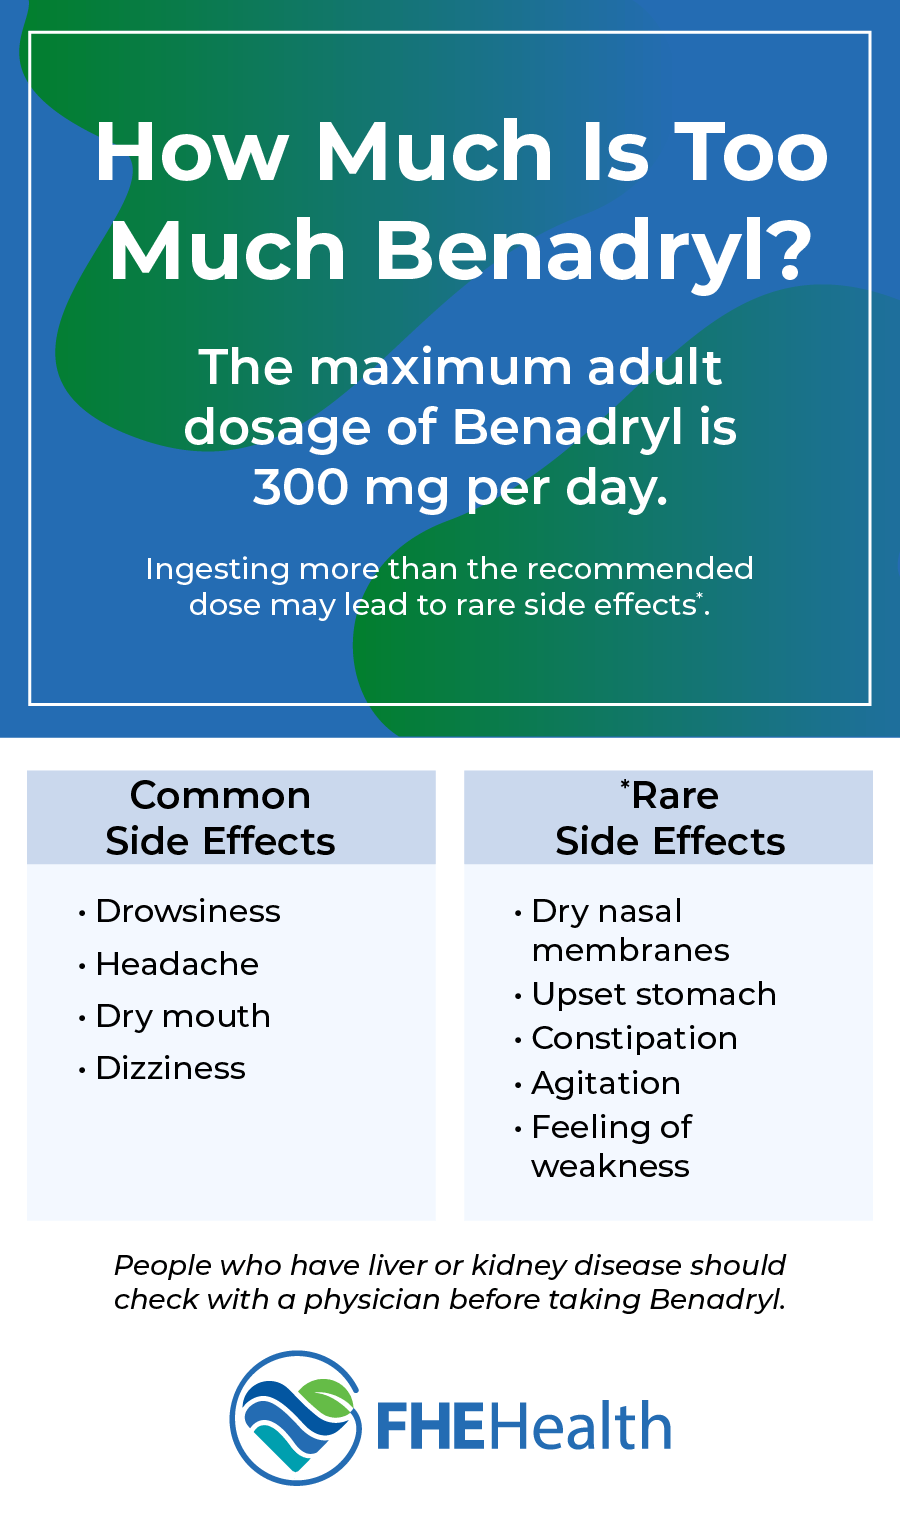 The maximum adult dosage is 300mg per day - and side effects